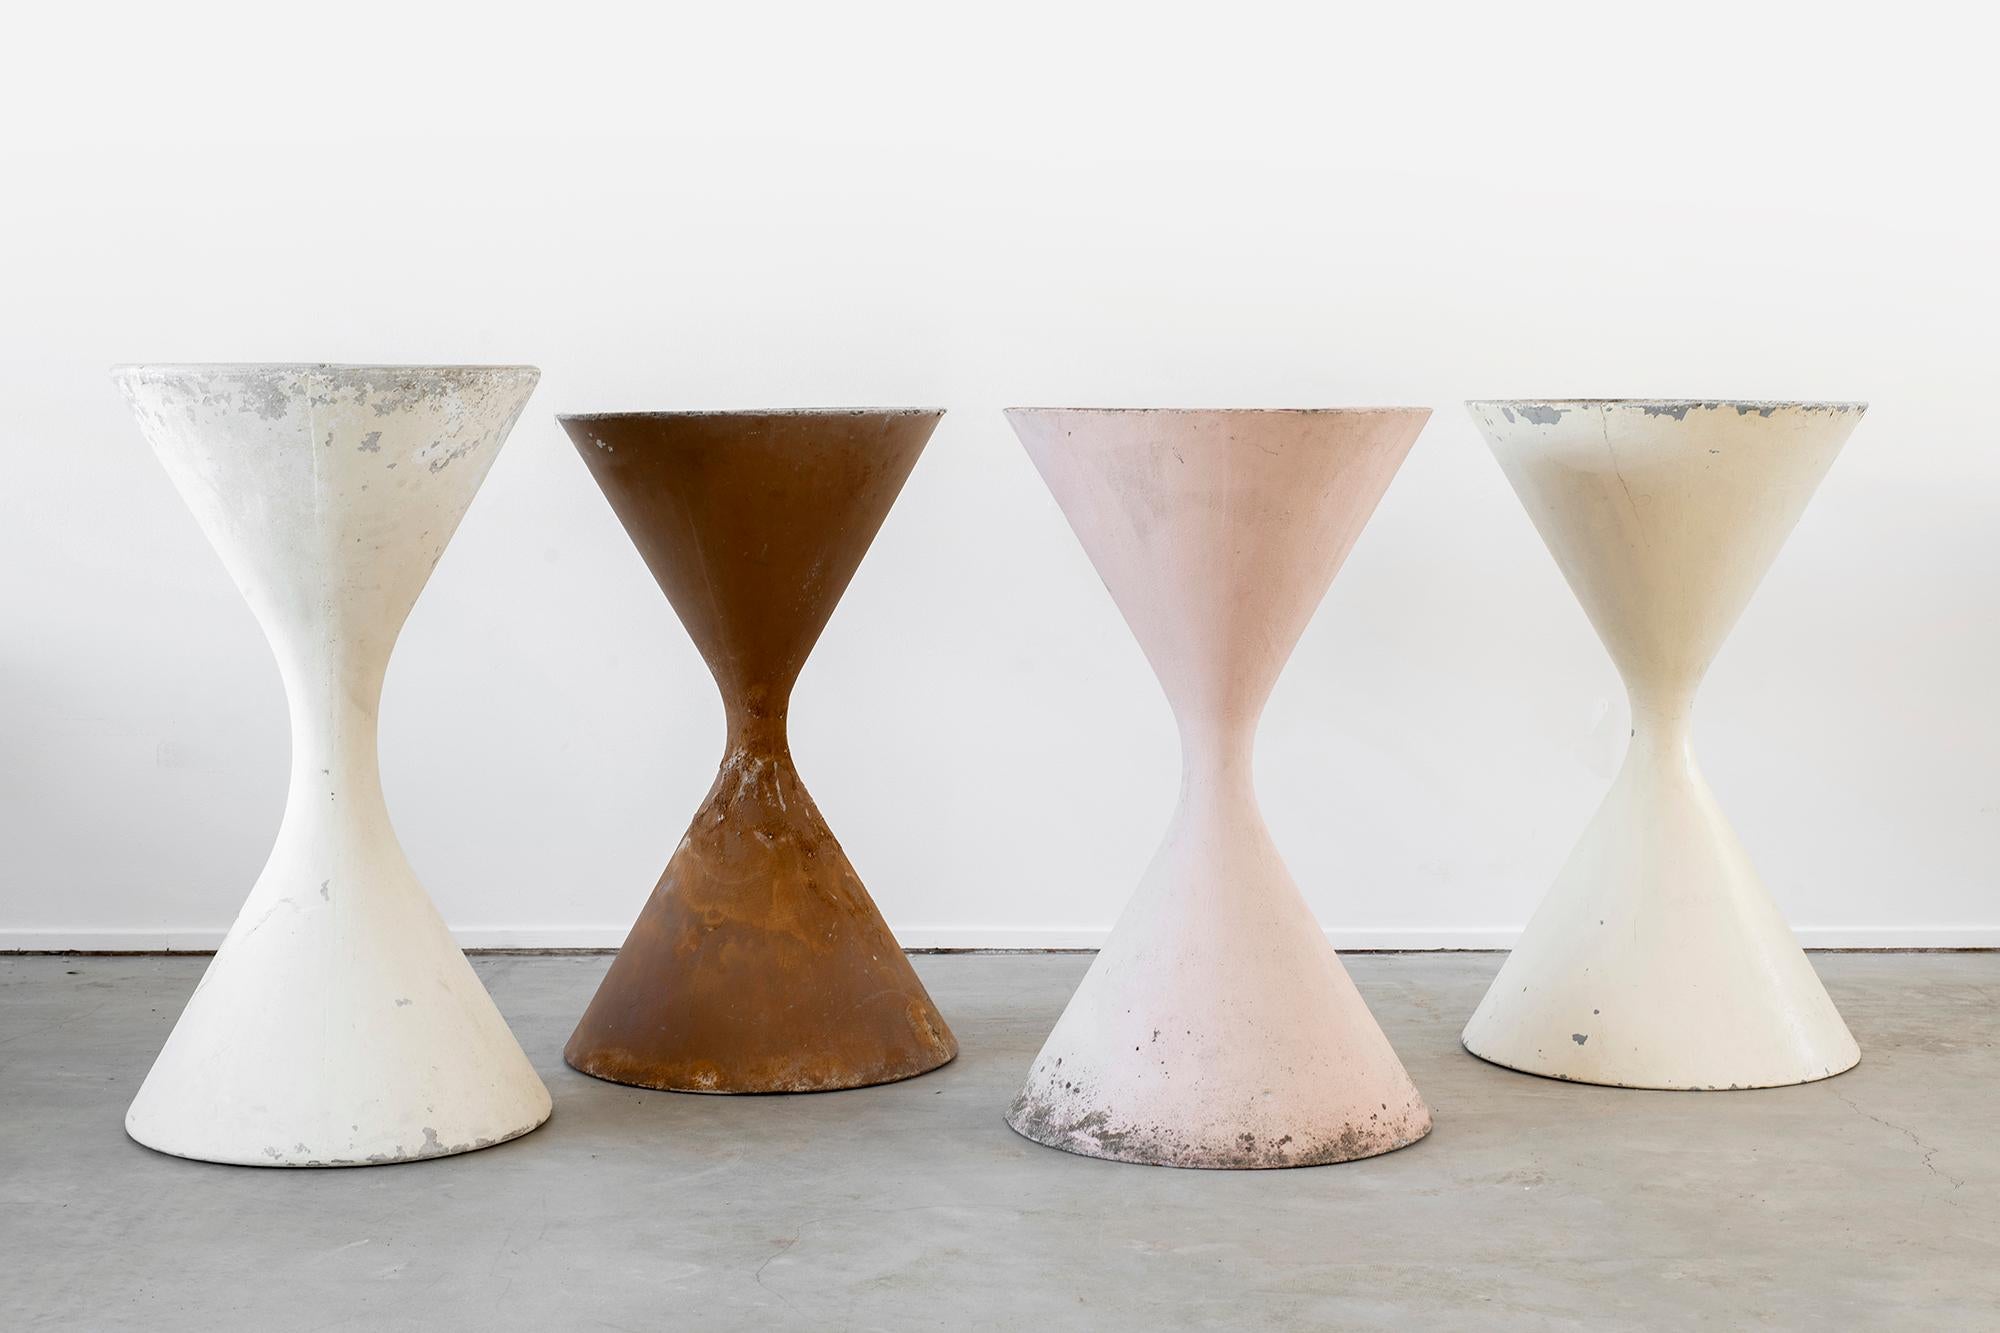 Wonderful concrete hourglass planters by the Swiss Architect, Willy Guhl.
Great age, patina and coloring. 
Iconic sculptural planter or garden object.

Listing is for a 35.5